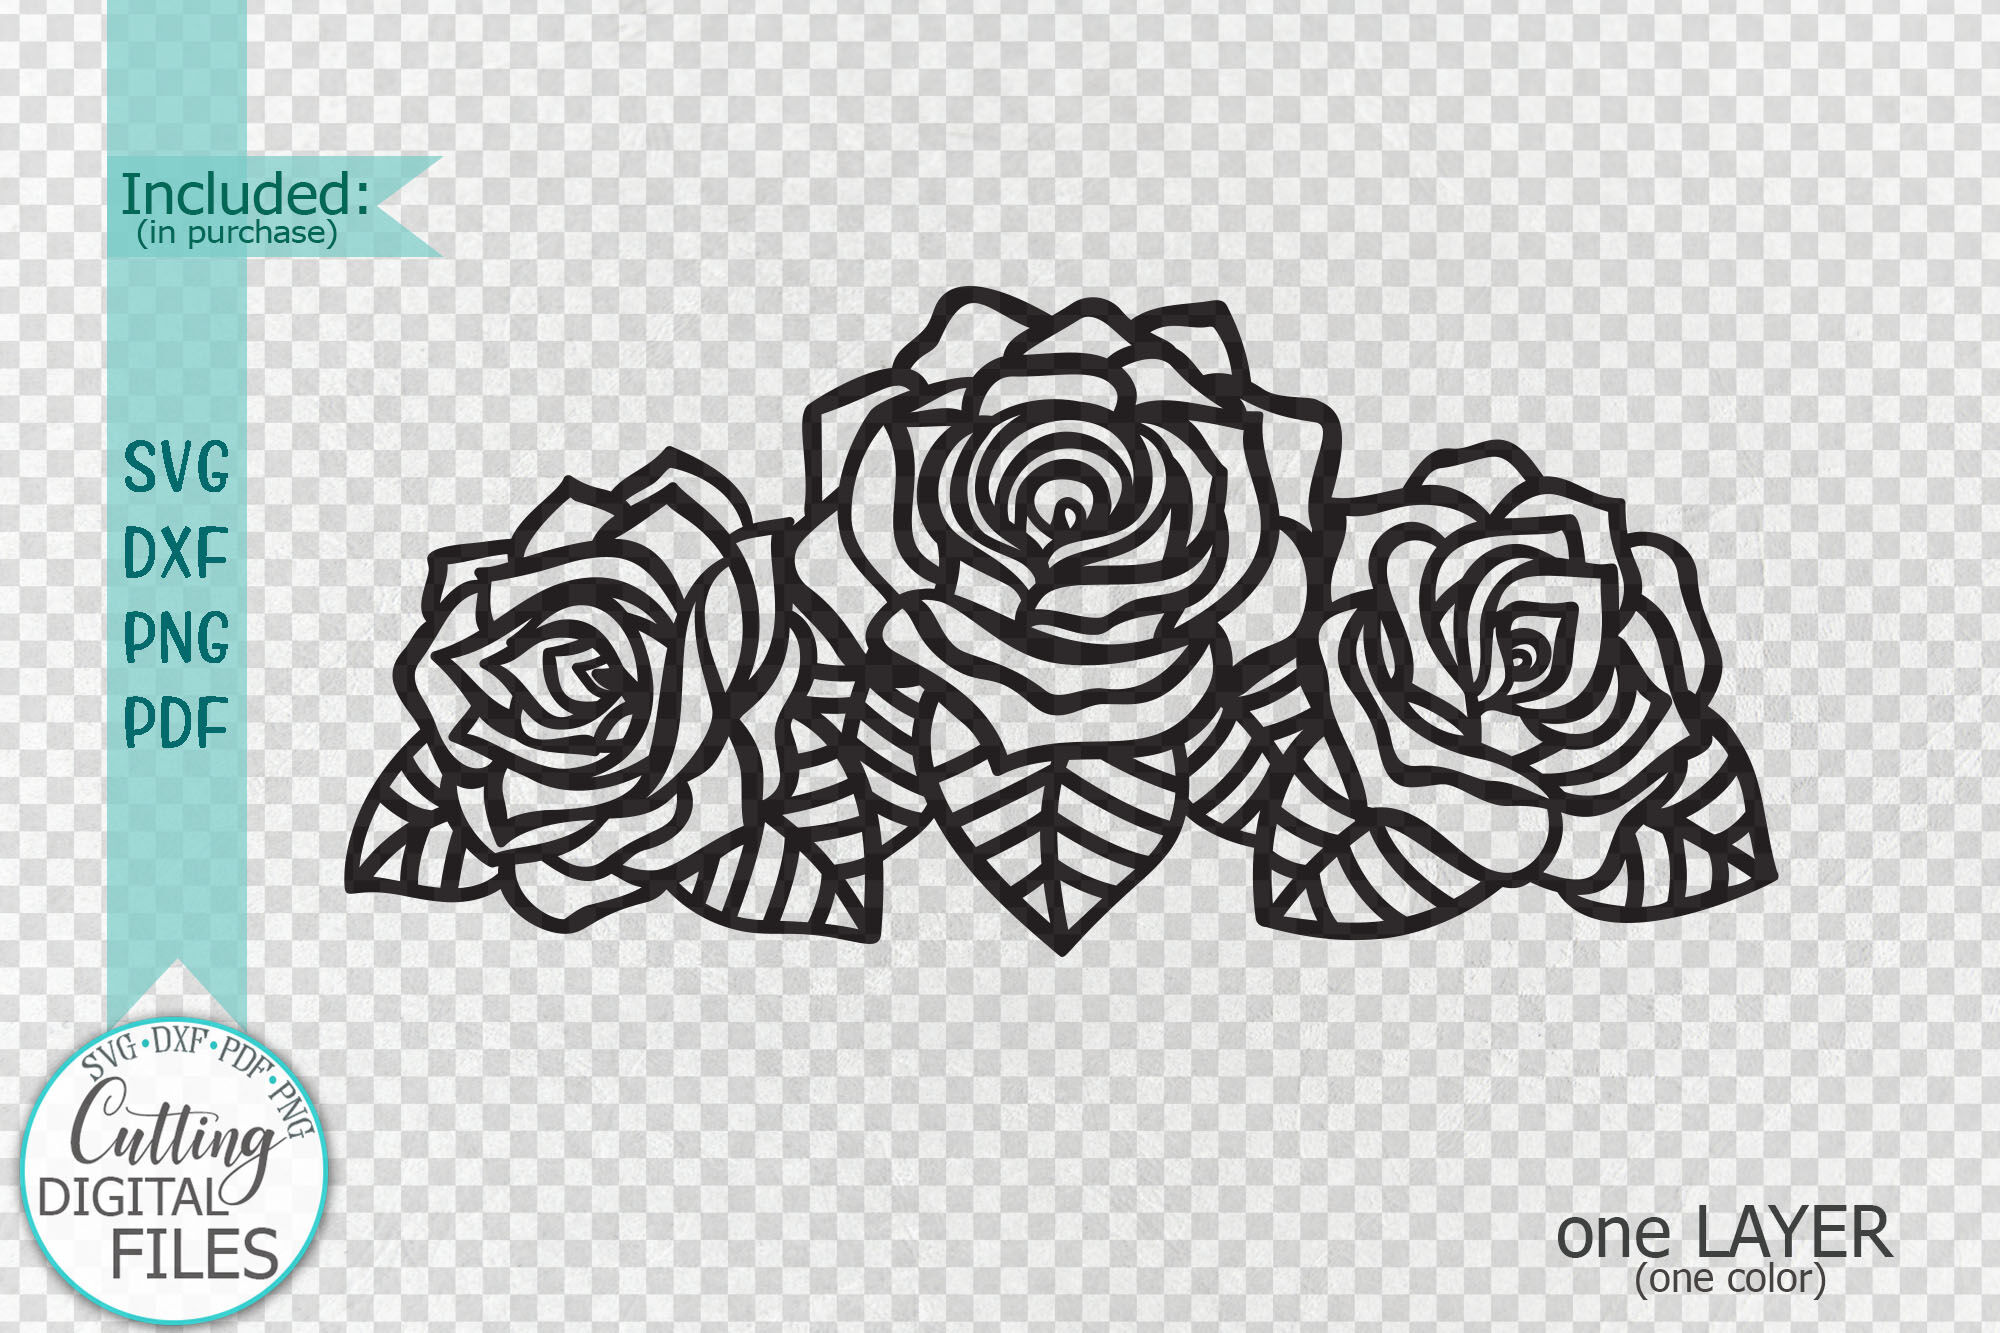 Download Roses With Leaves Border Svg Dxf Cut Out Laser Cricut Files By Kartcreation Thehungryjpeg Com